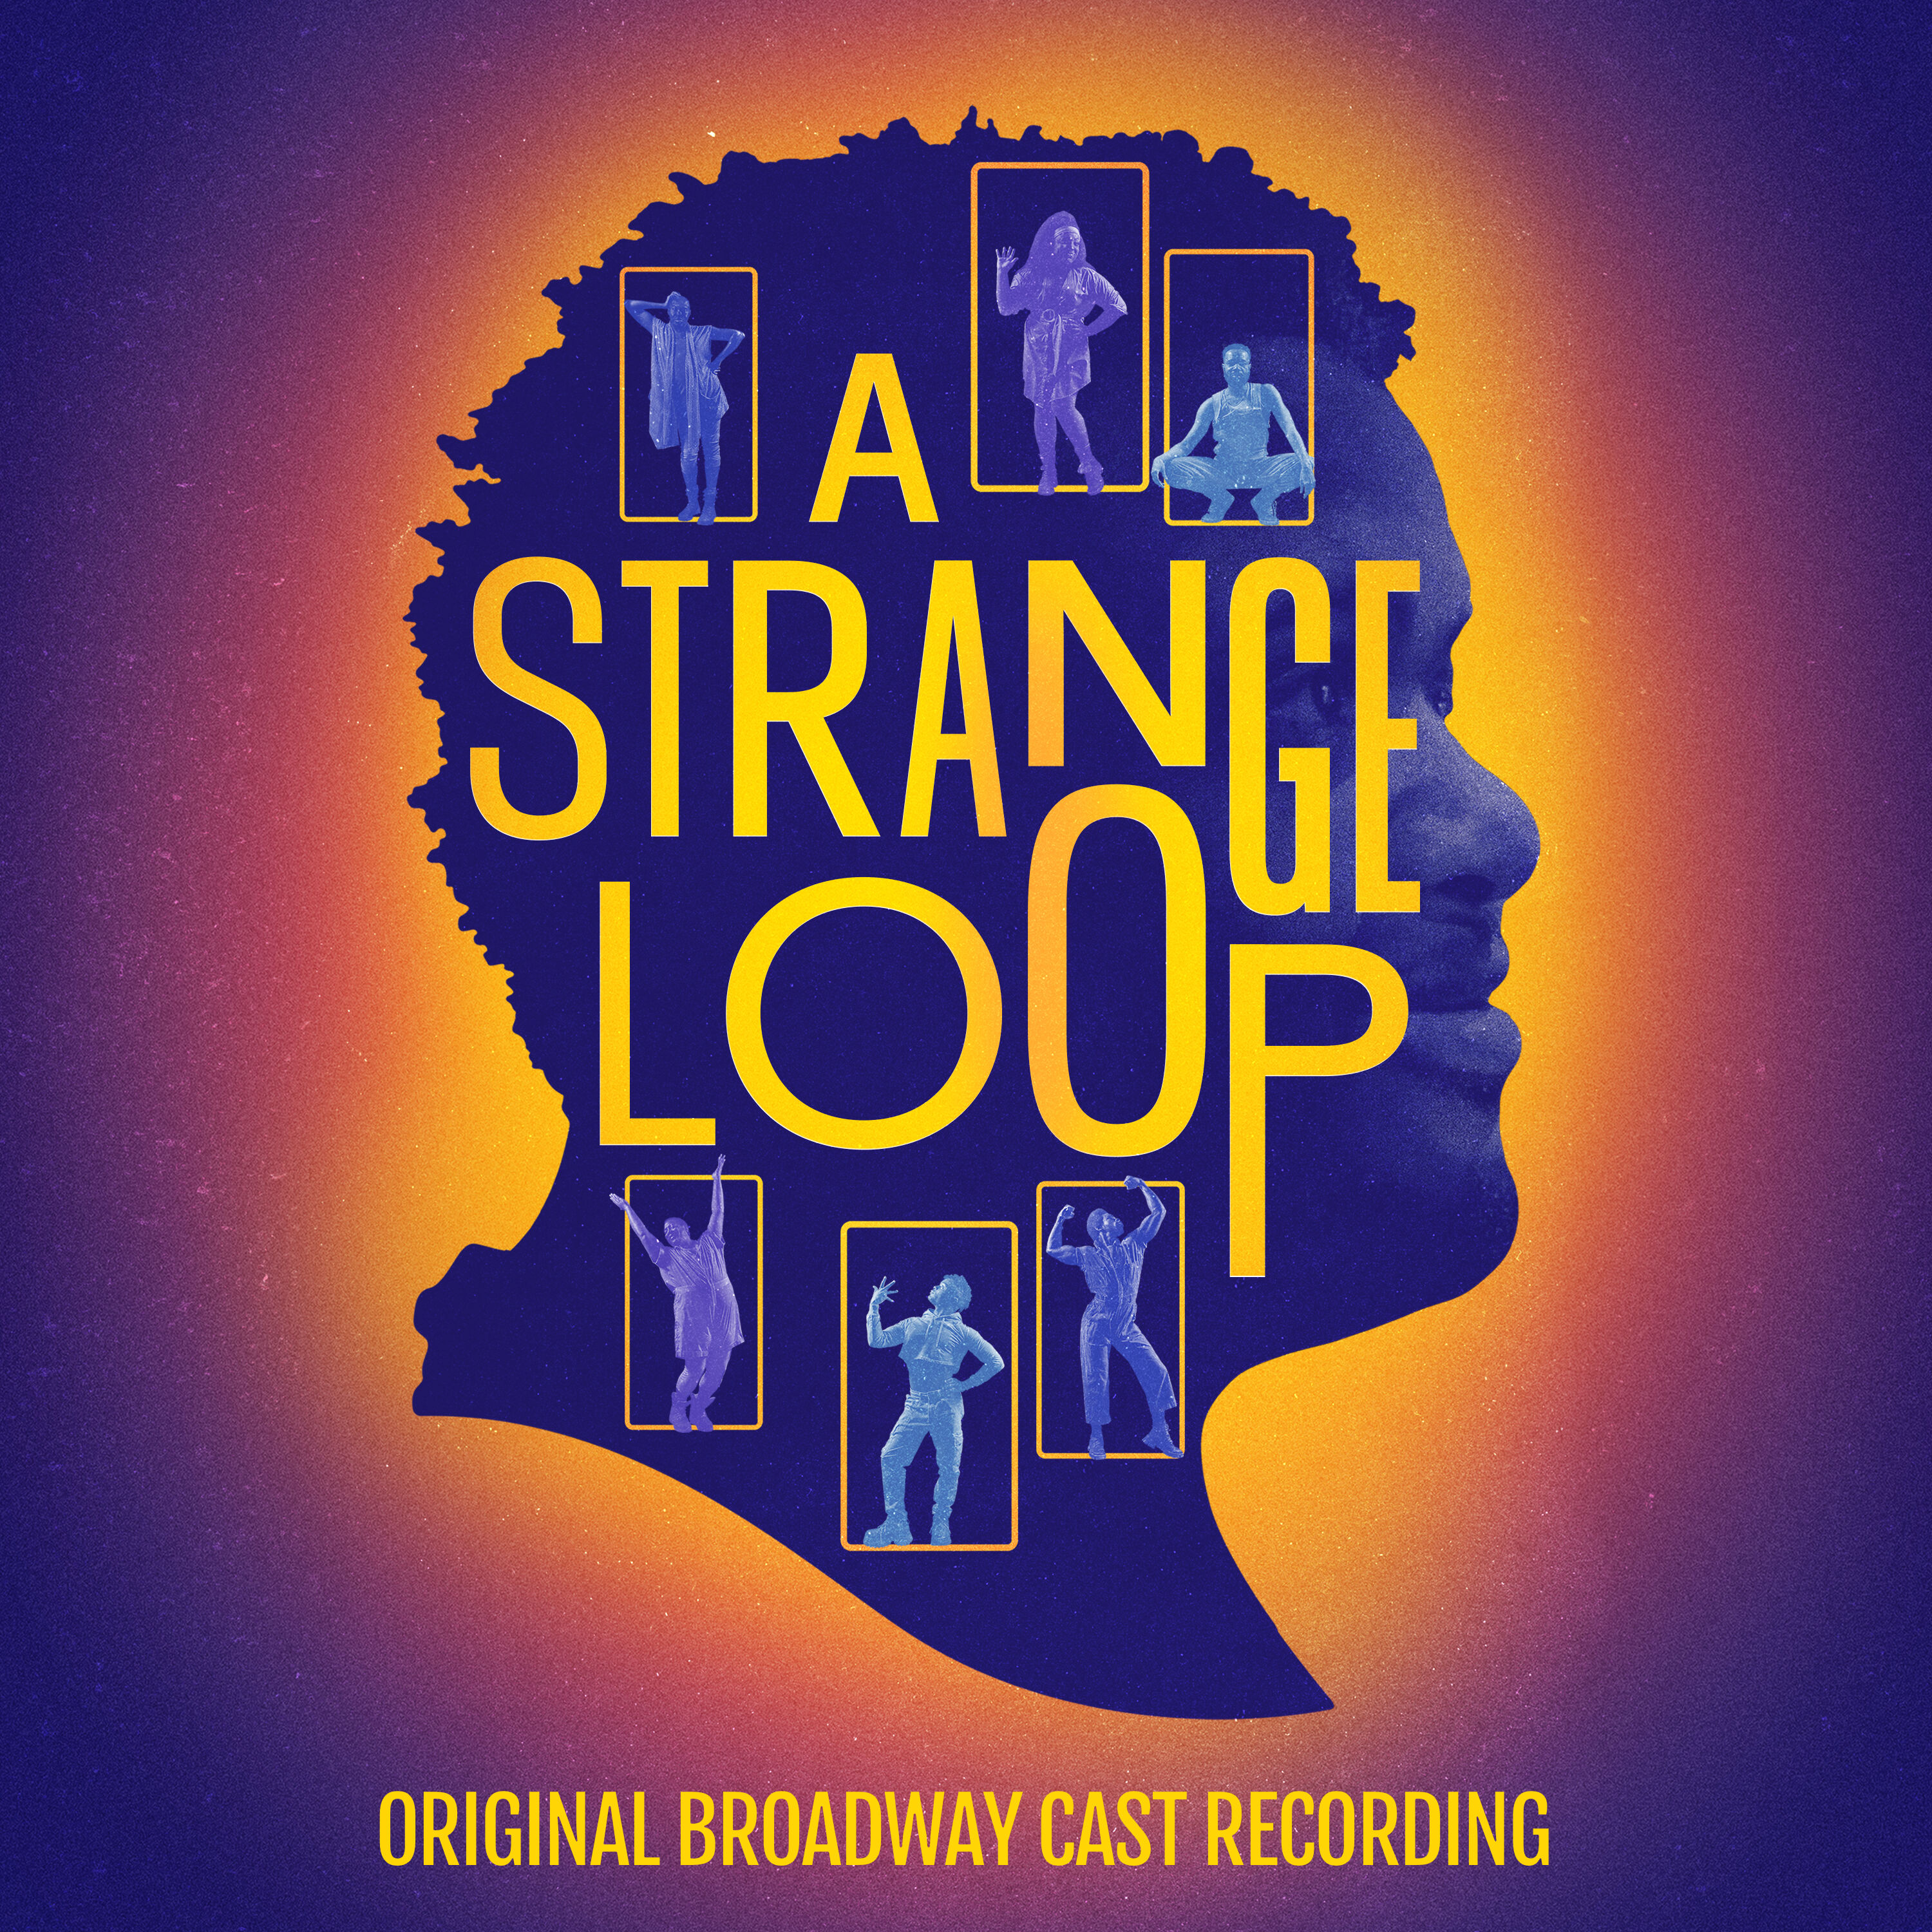 AVAILABLE NOW: A STRANGE LOOP